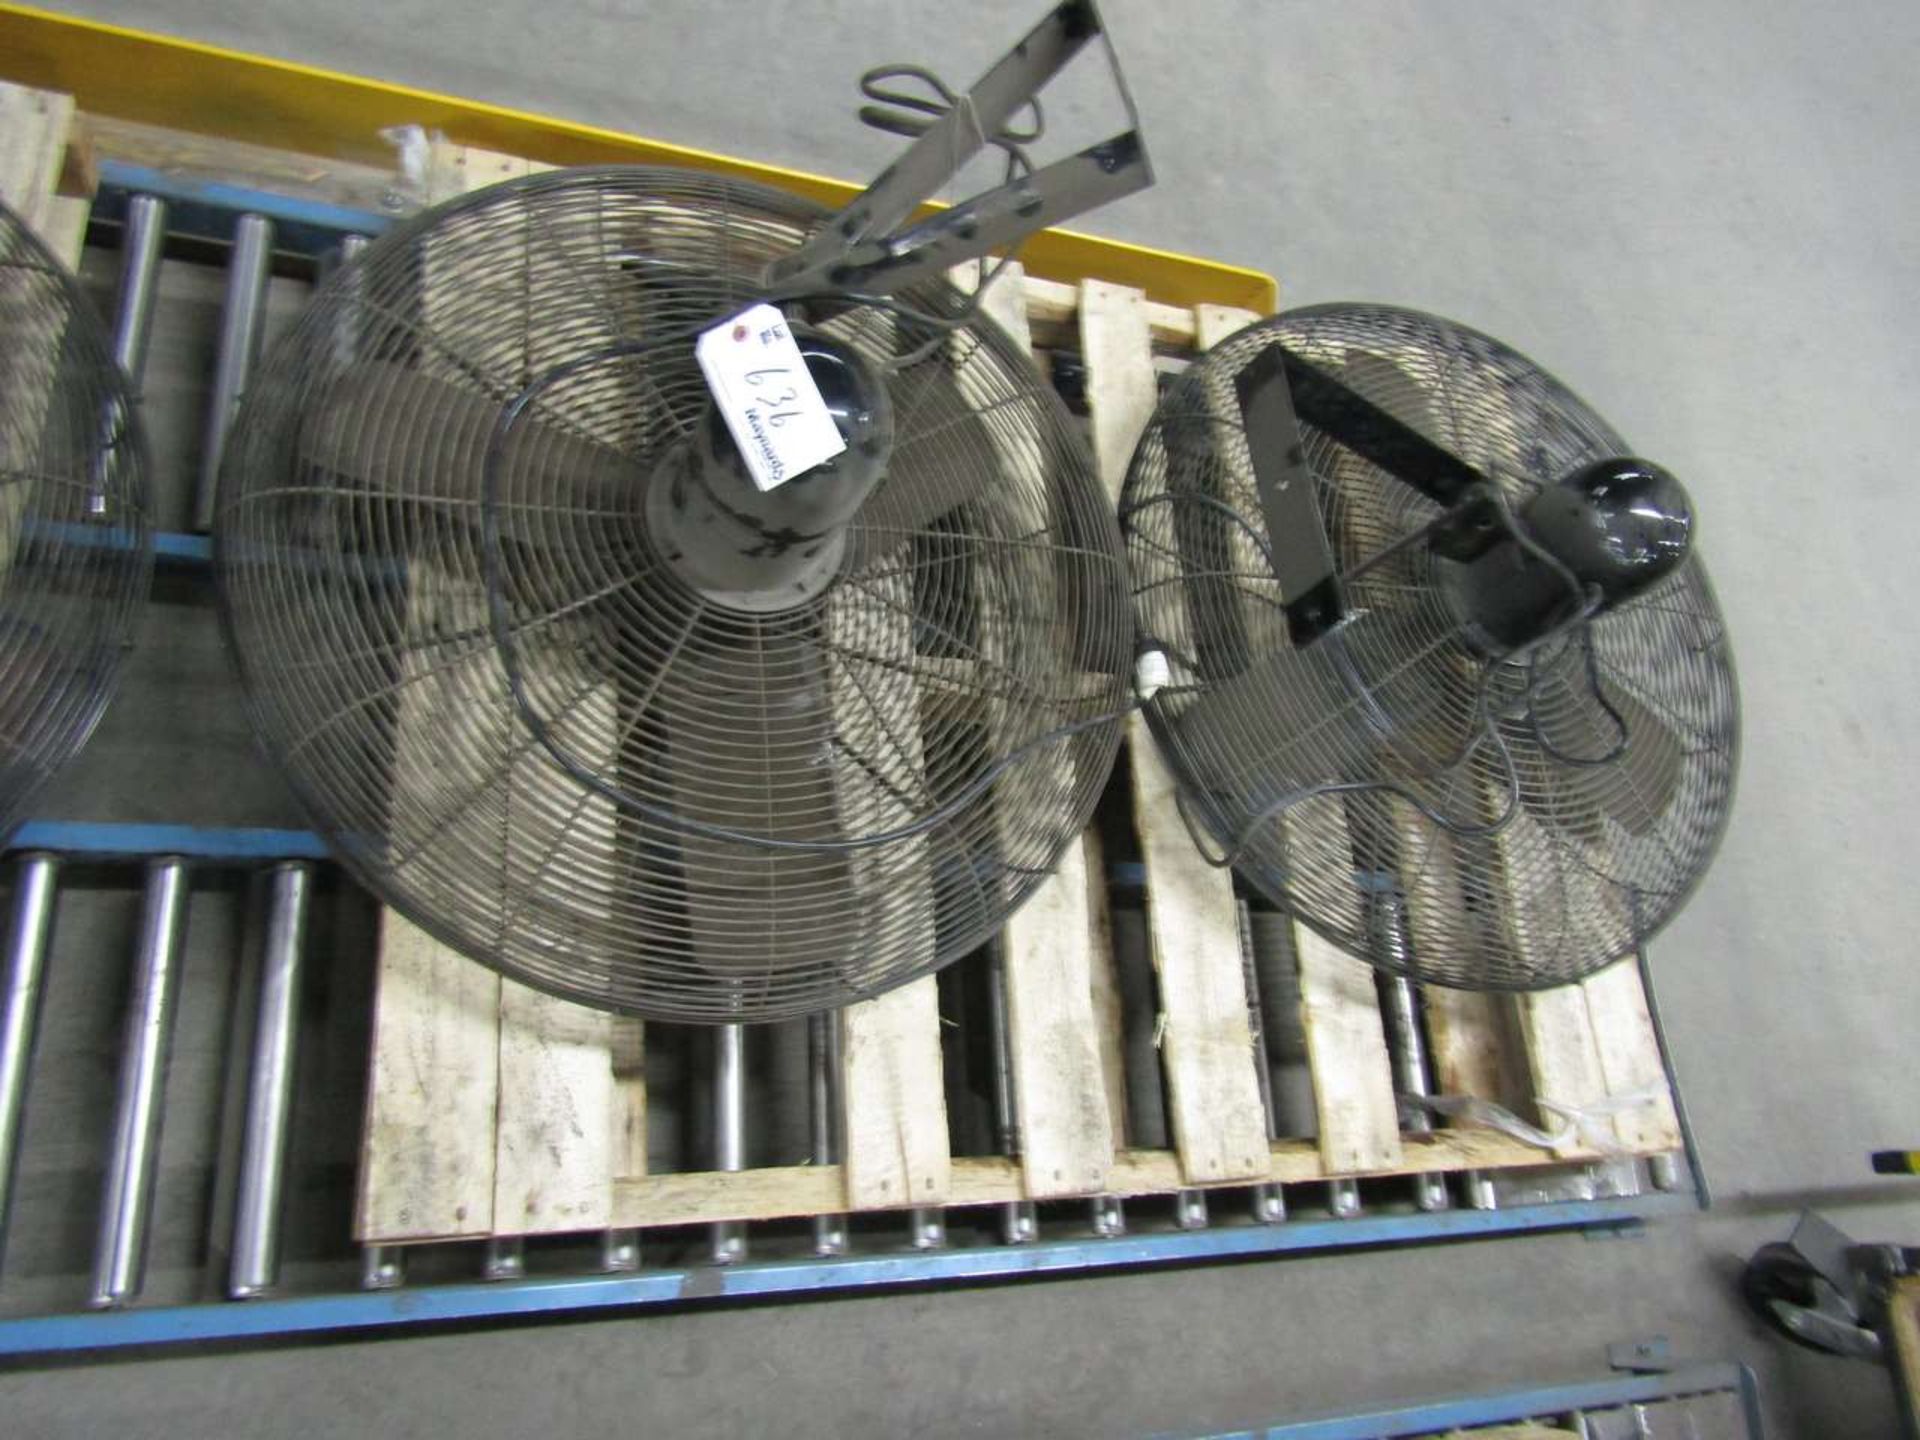 1 Skid with 2 34" Industrial Fans with mounting Bracket